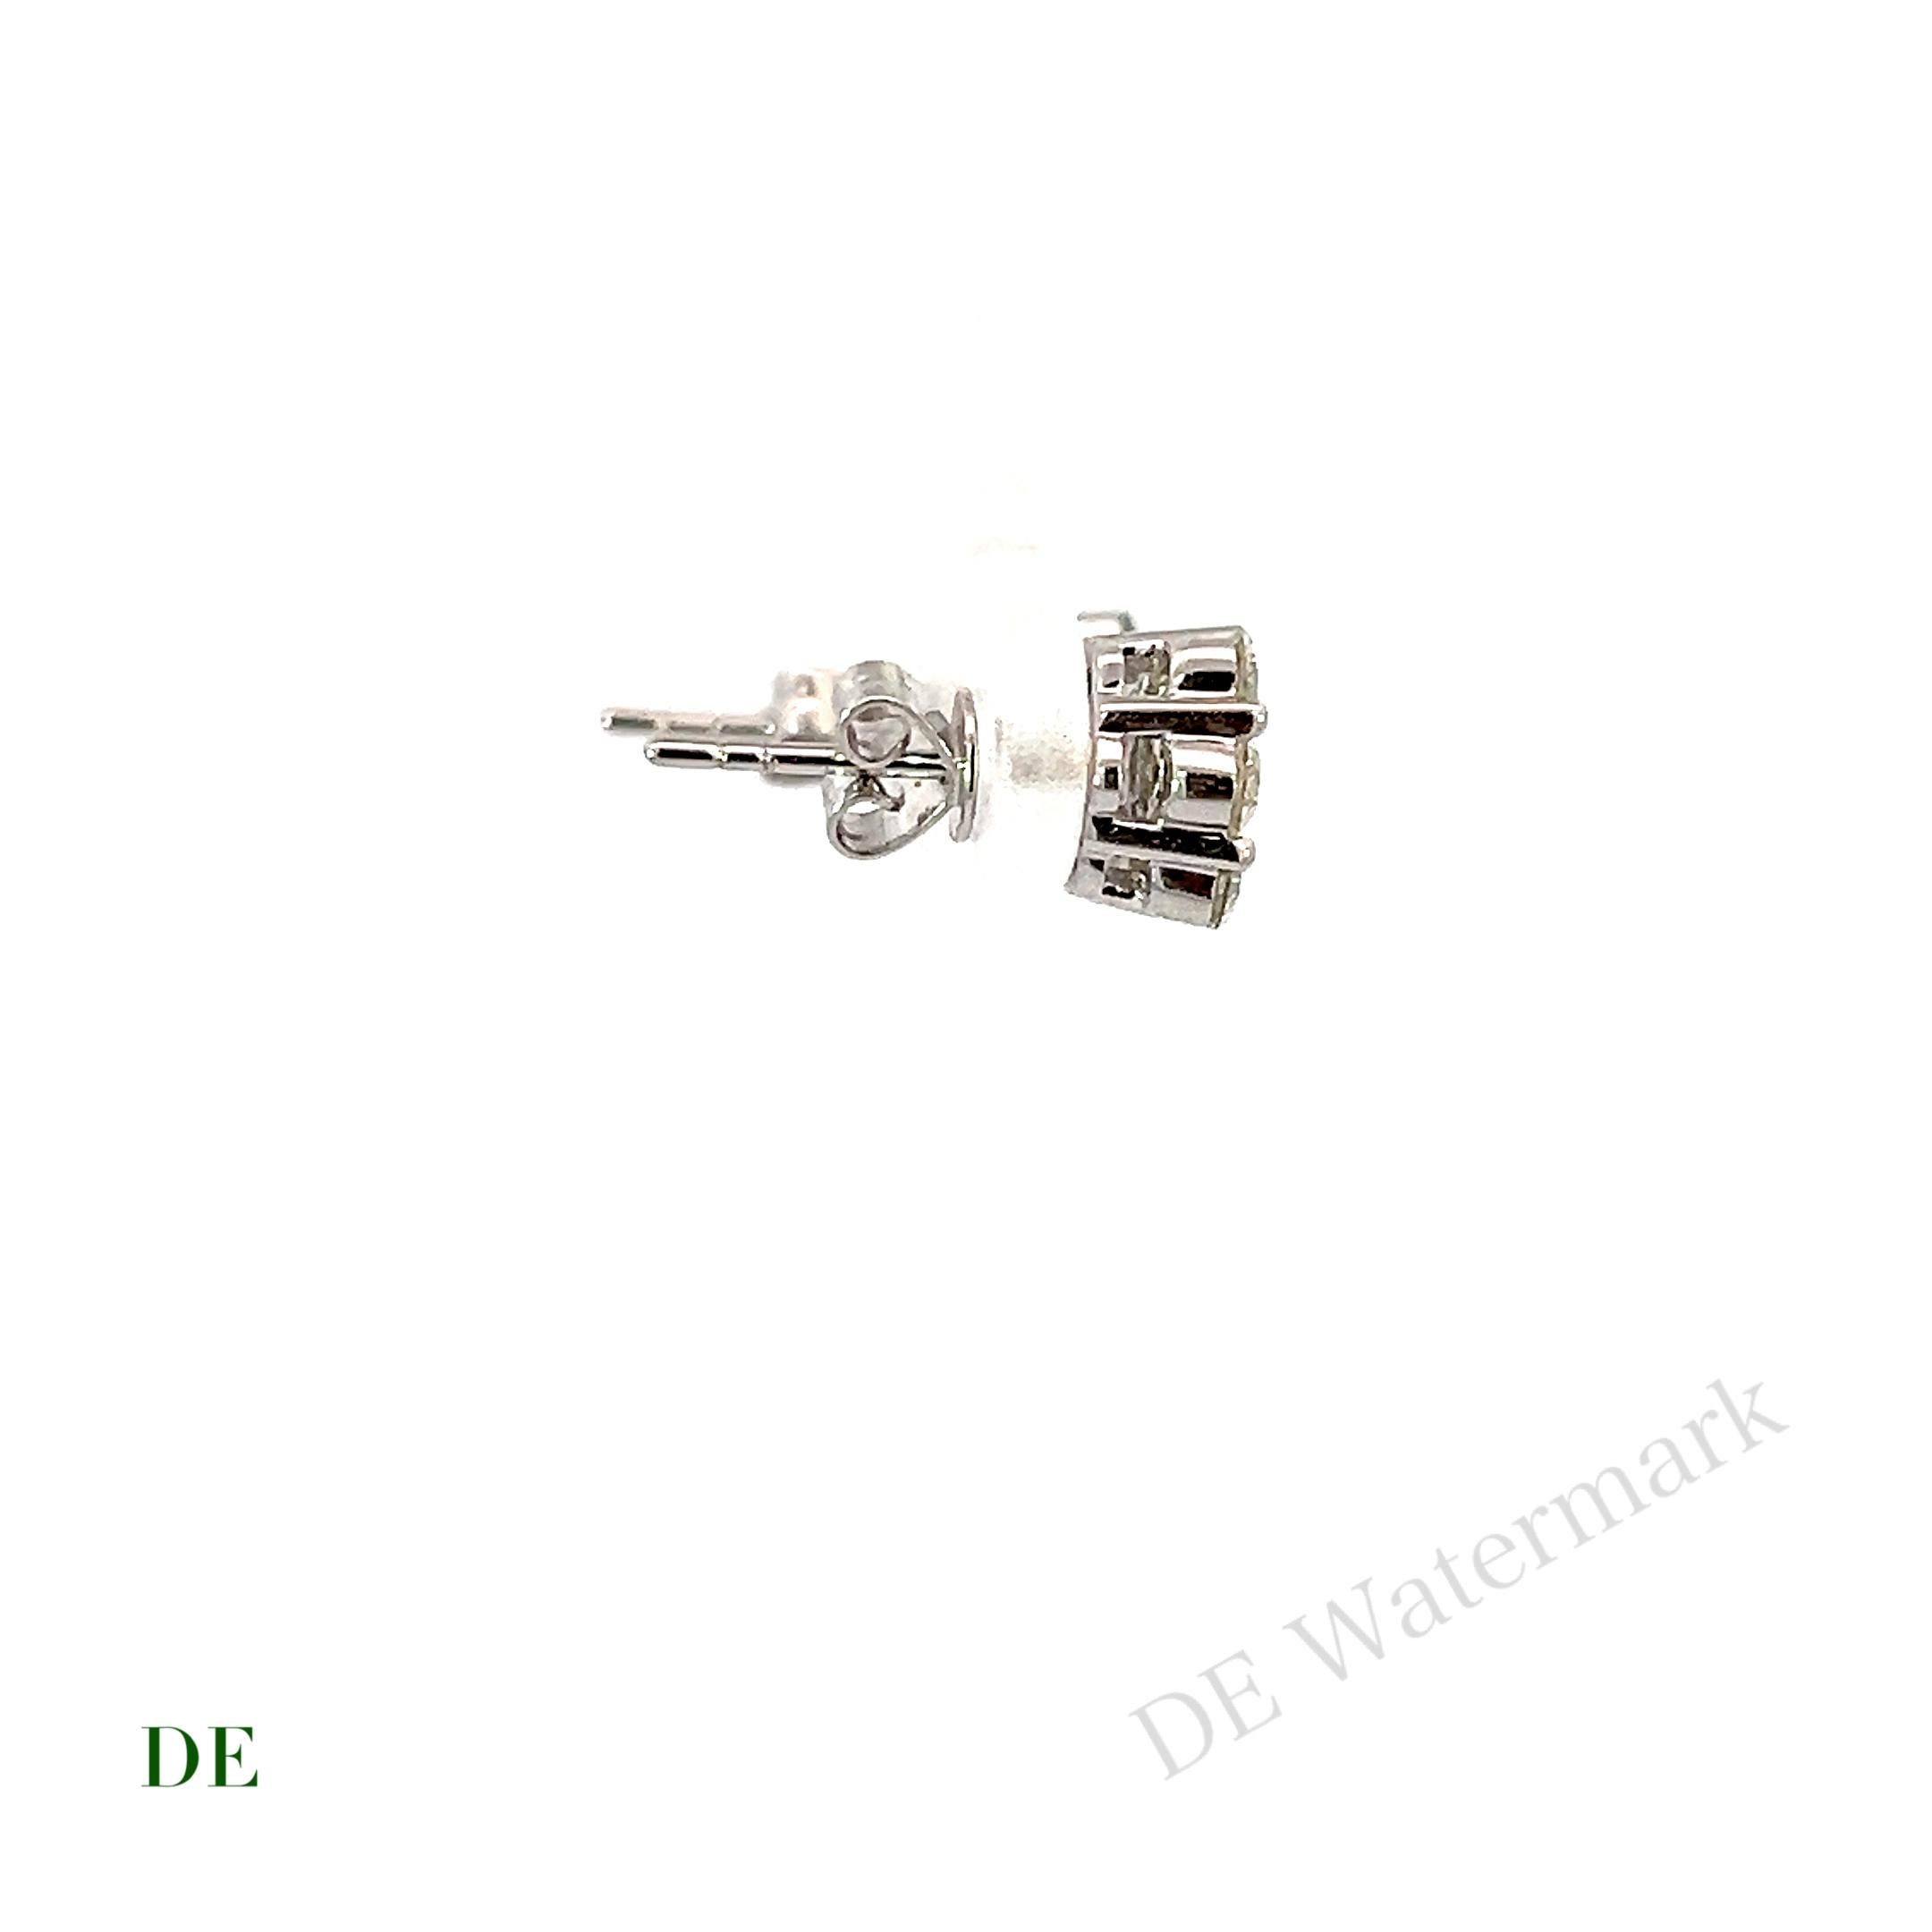 Classic 14k White Gold 1.28 Carat Diamond Cluster Earring Stud

Introducing our Classic 14k White Gold 1.28 Carat Diamond Cluster Earring Studs. These stunning earrings are the epitome of elegance and sophistication, perfect for those who appreciate